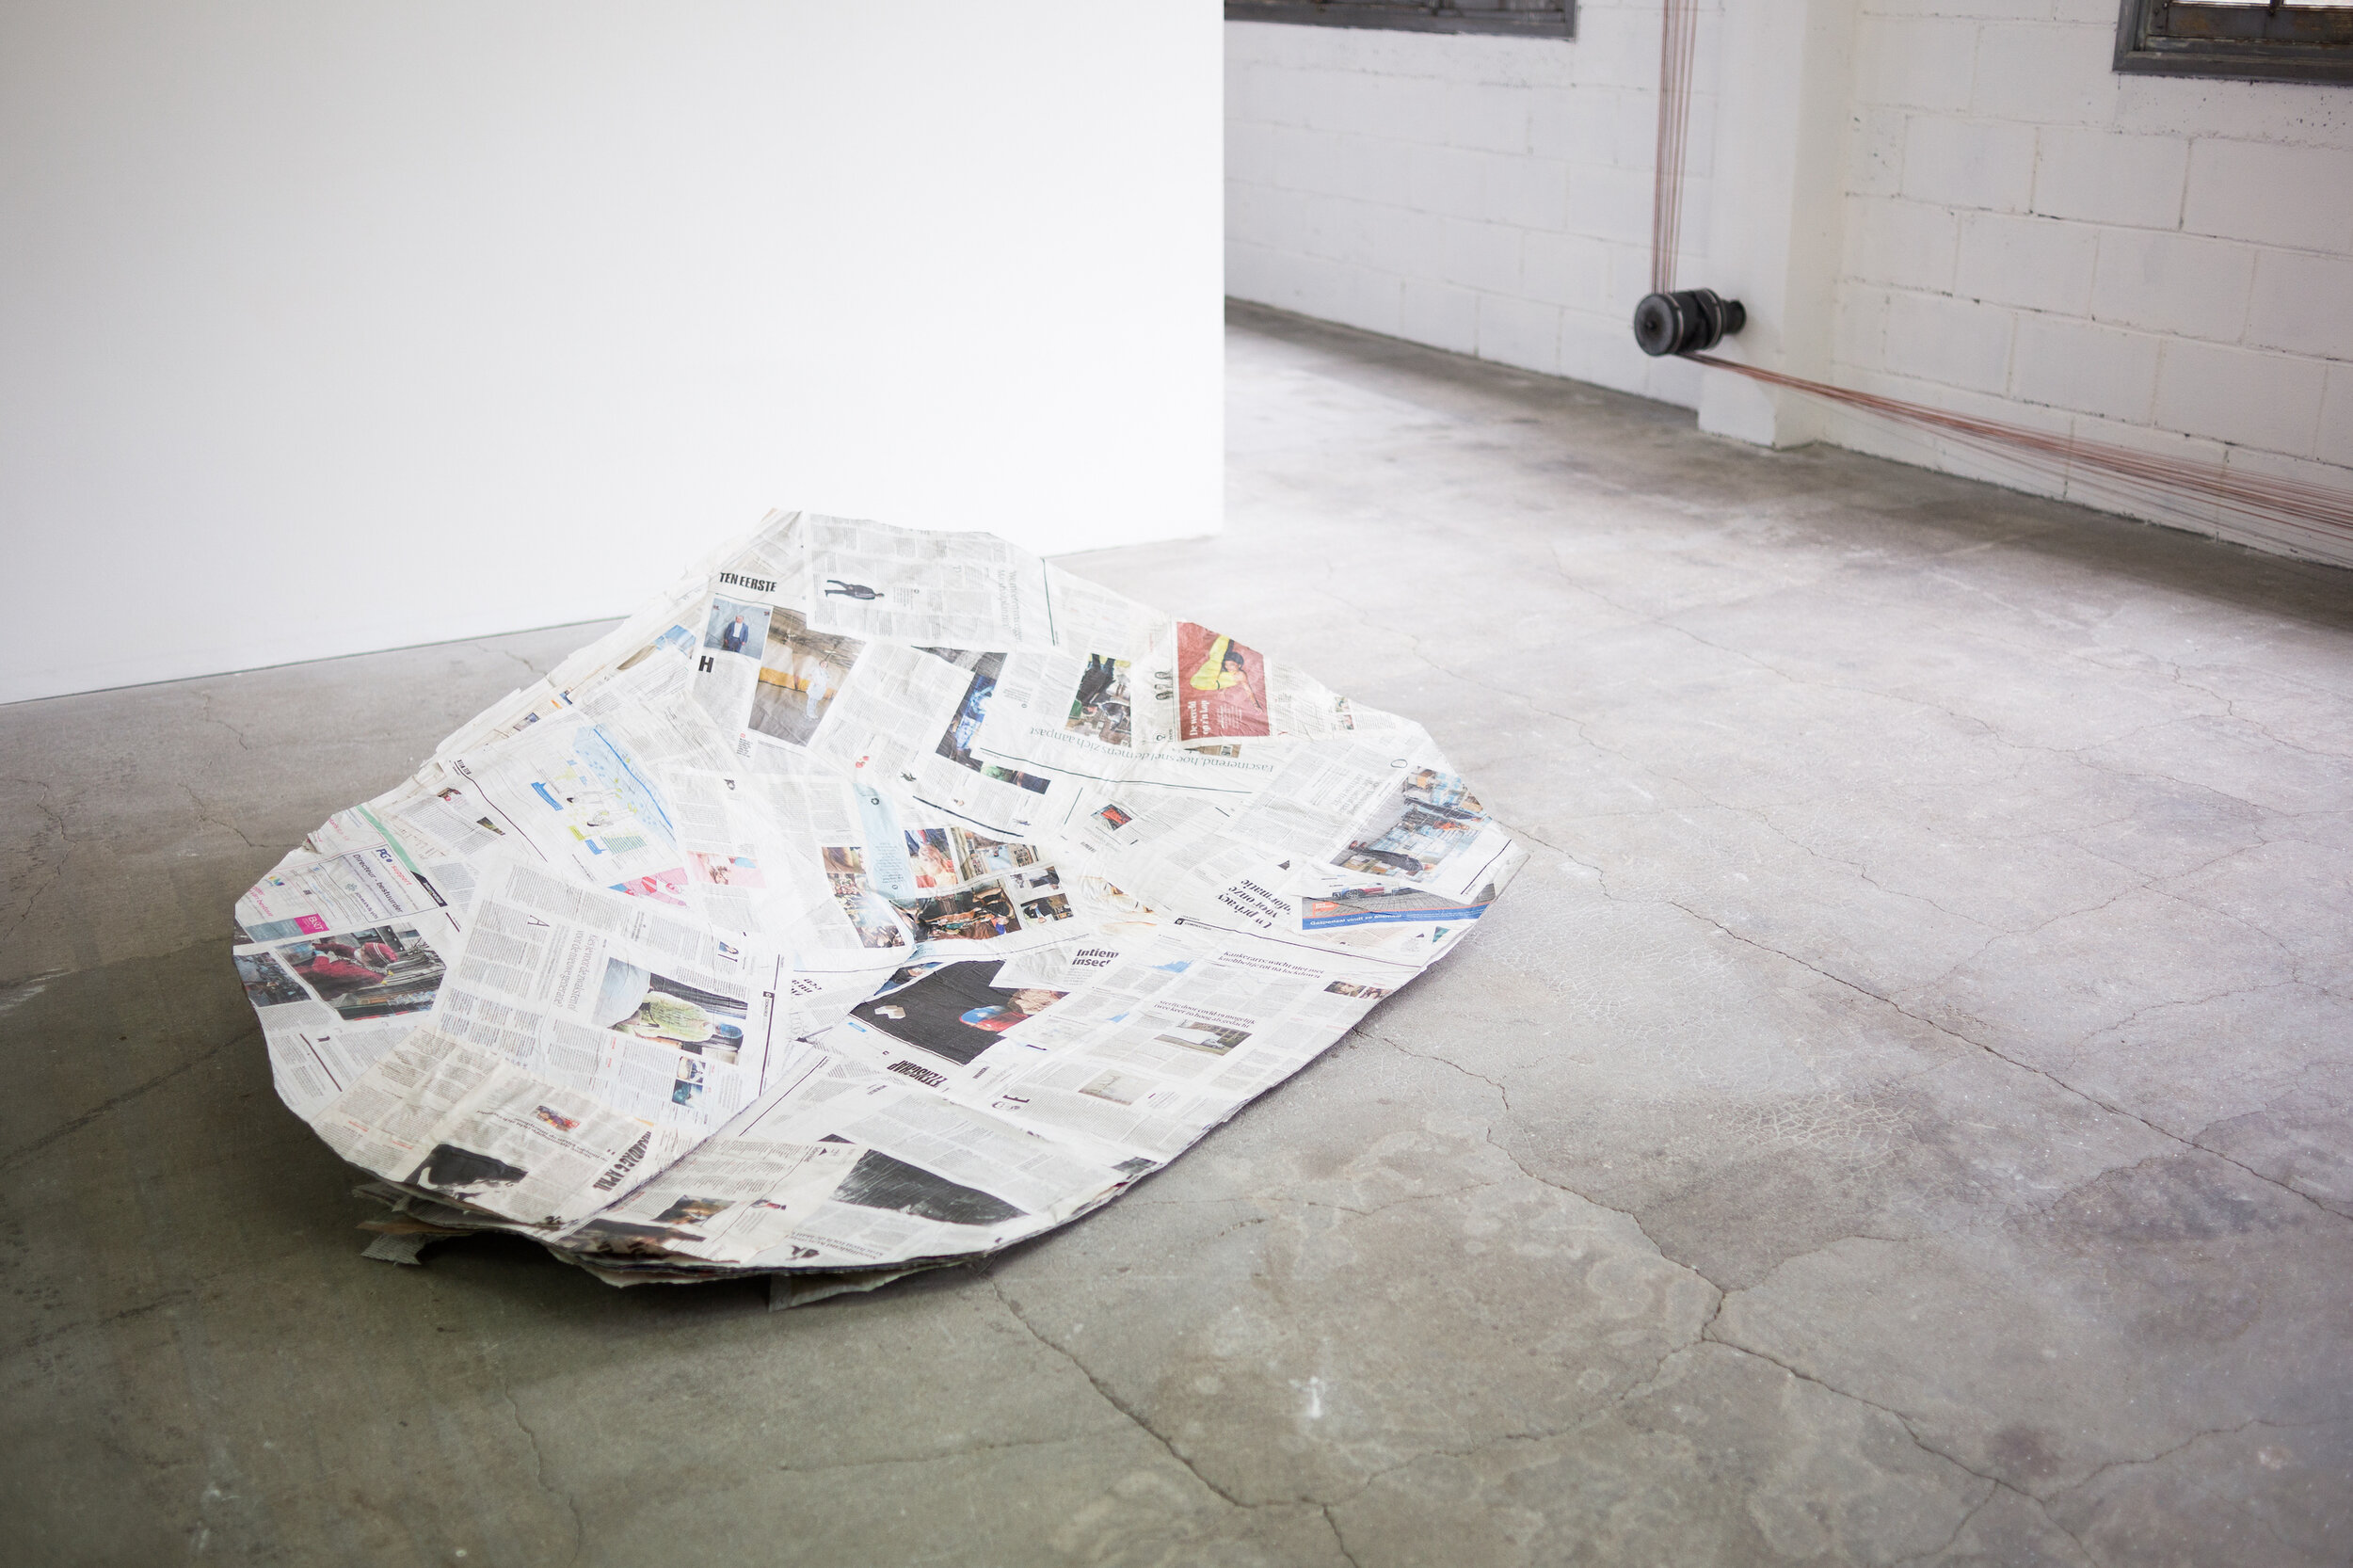    Shield, Shell, Shh  (2020), Dutch newspapers from 13 March - 6 April 2020, dimensions variable  